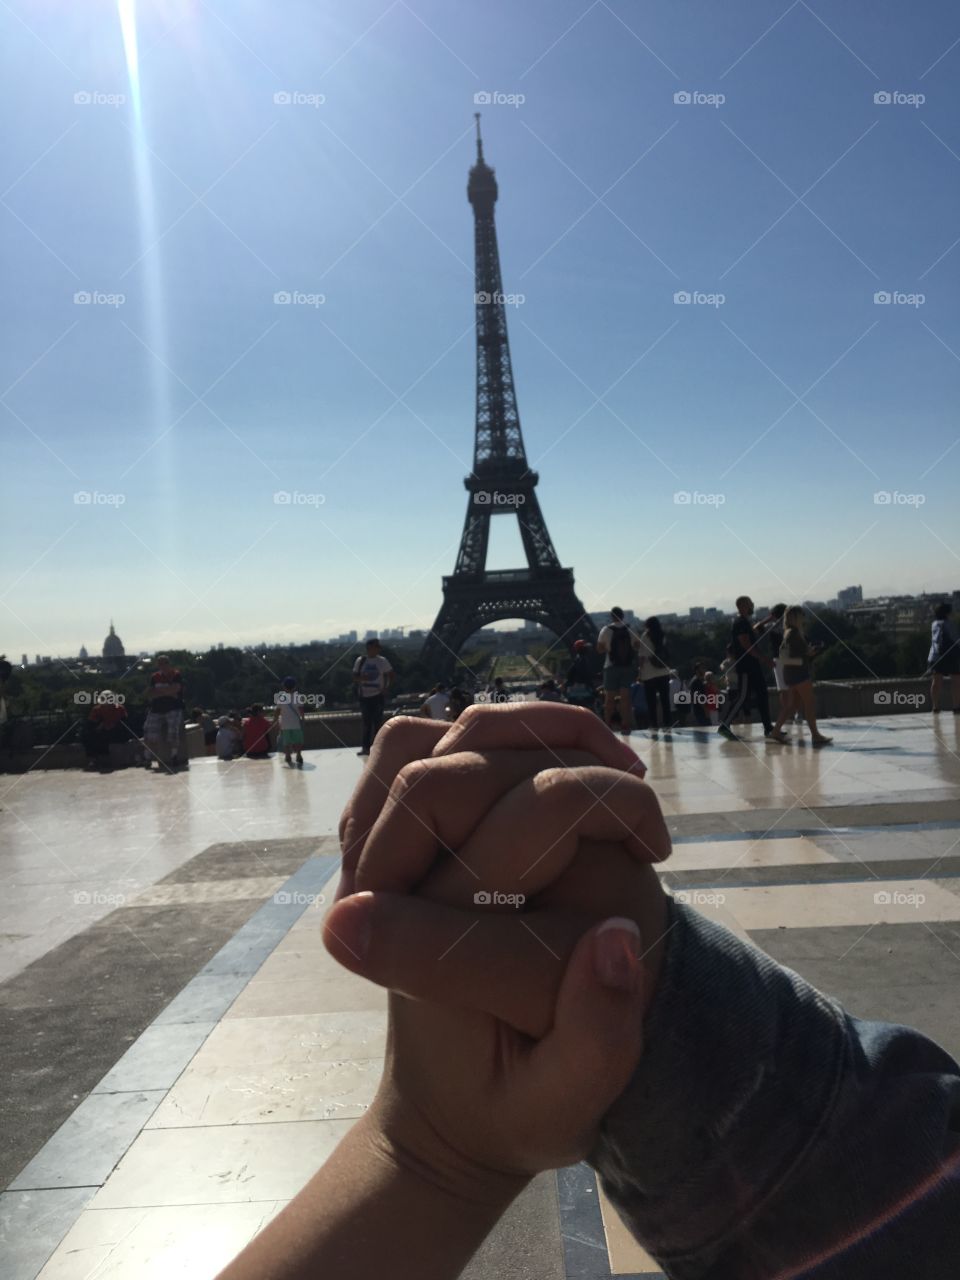 Holding hands in front of the Eiffel Tower in Paris France. 